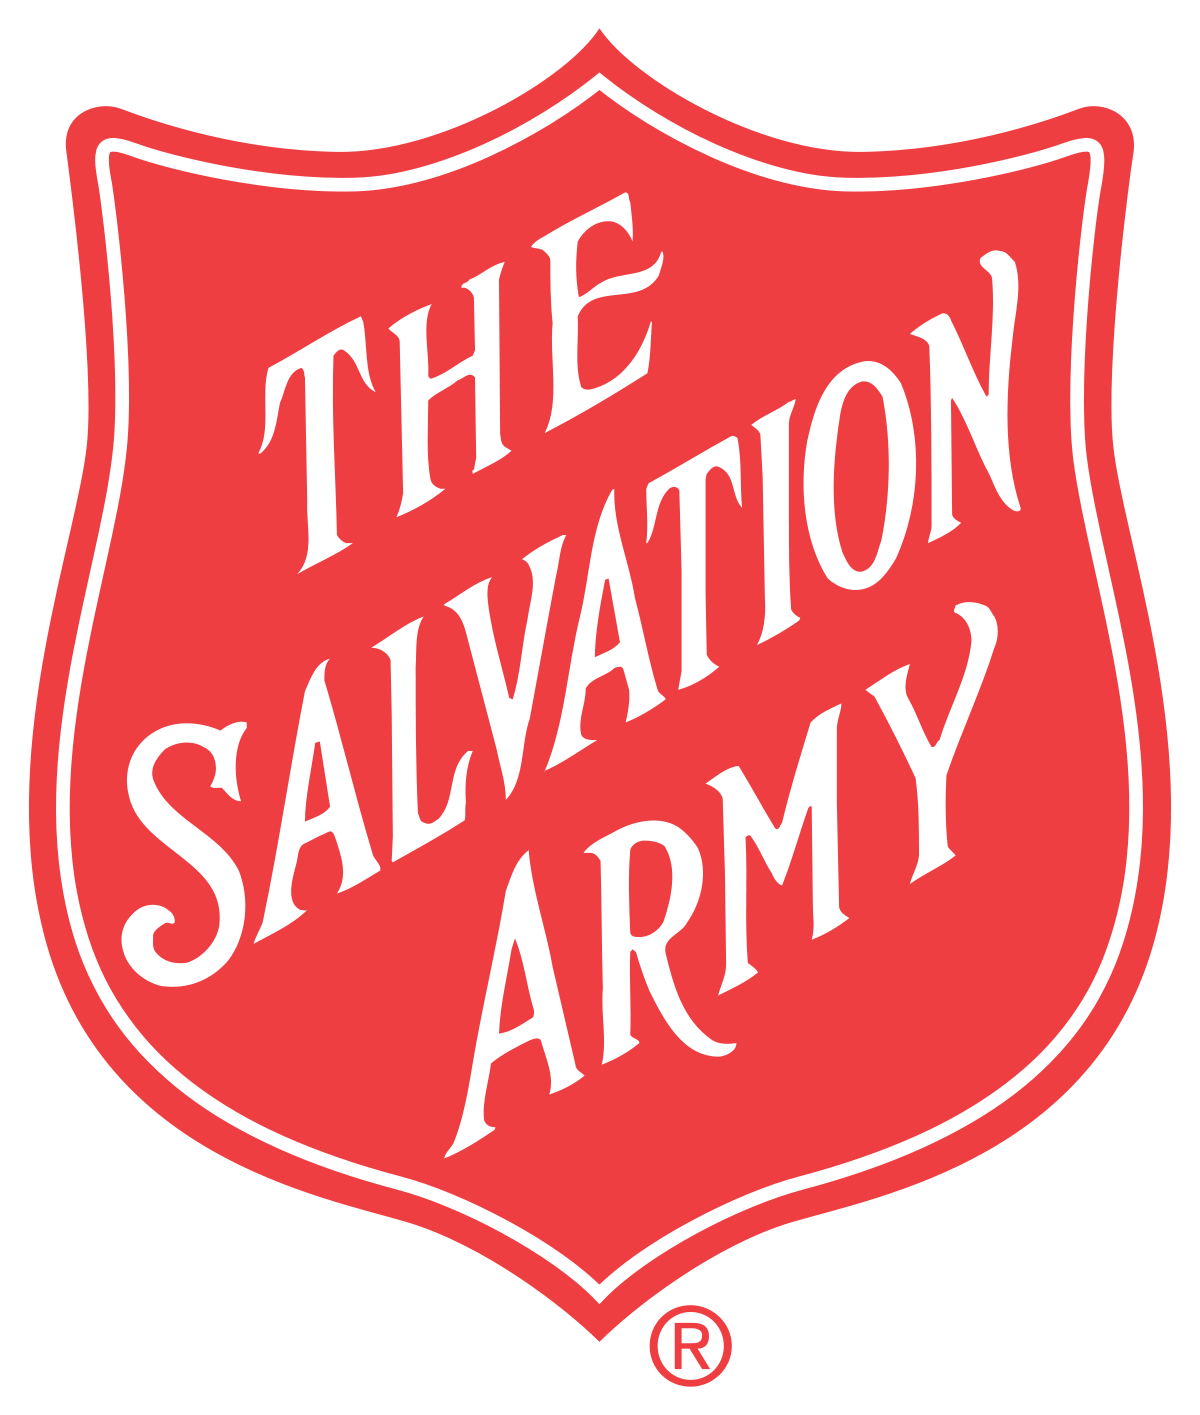 White and Red Shield Logo - The Salvation Army